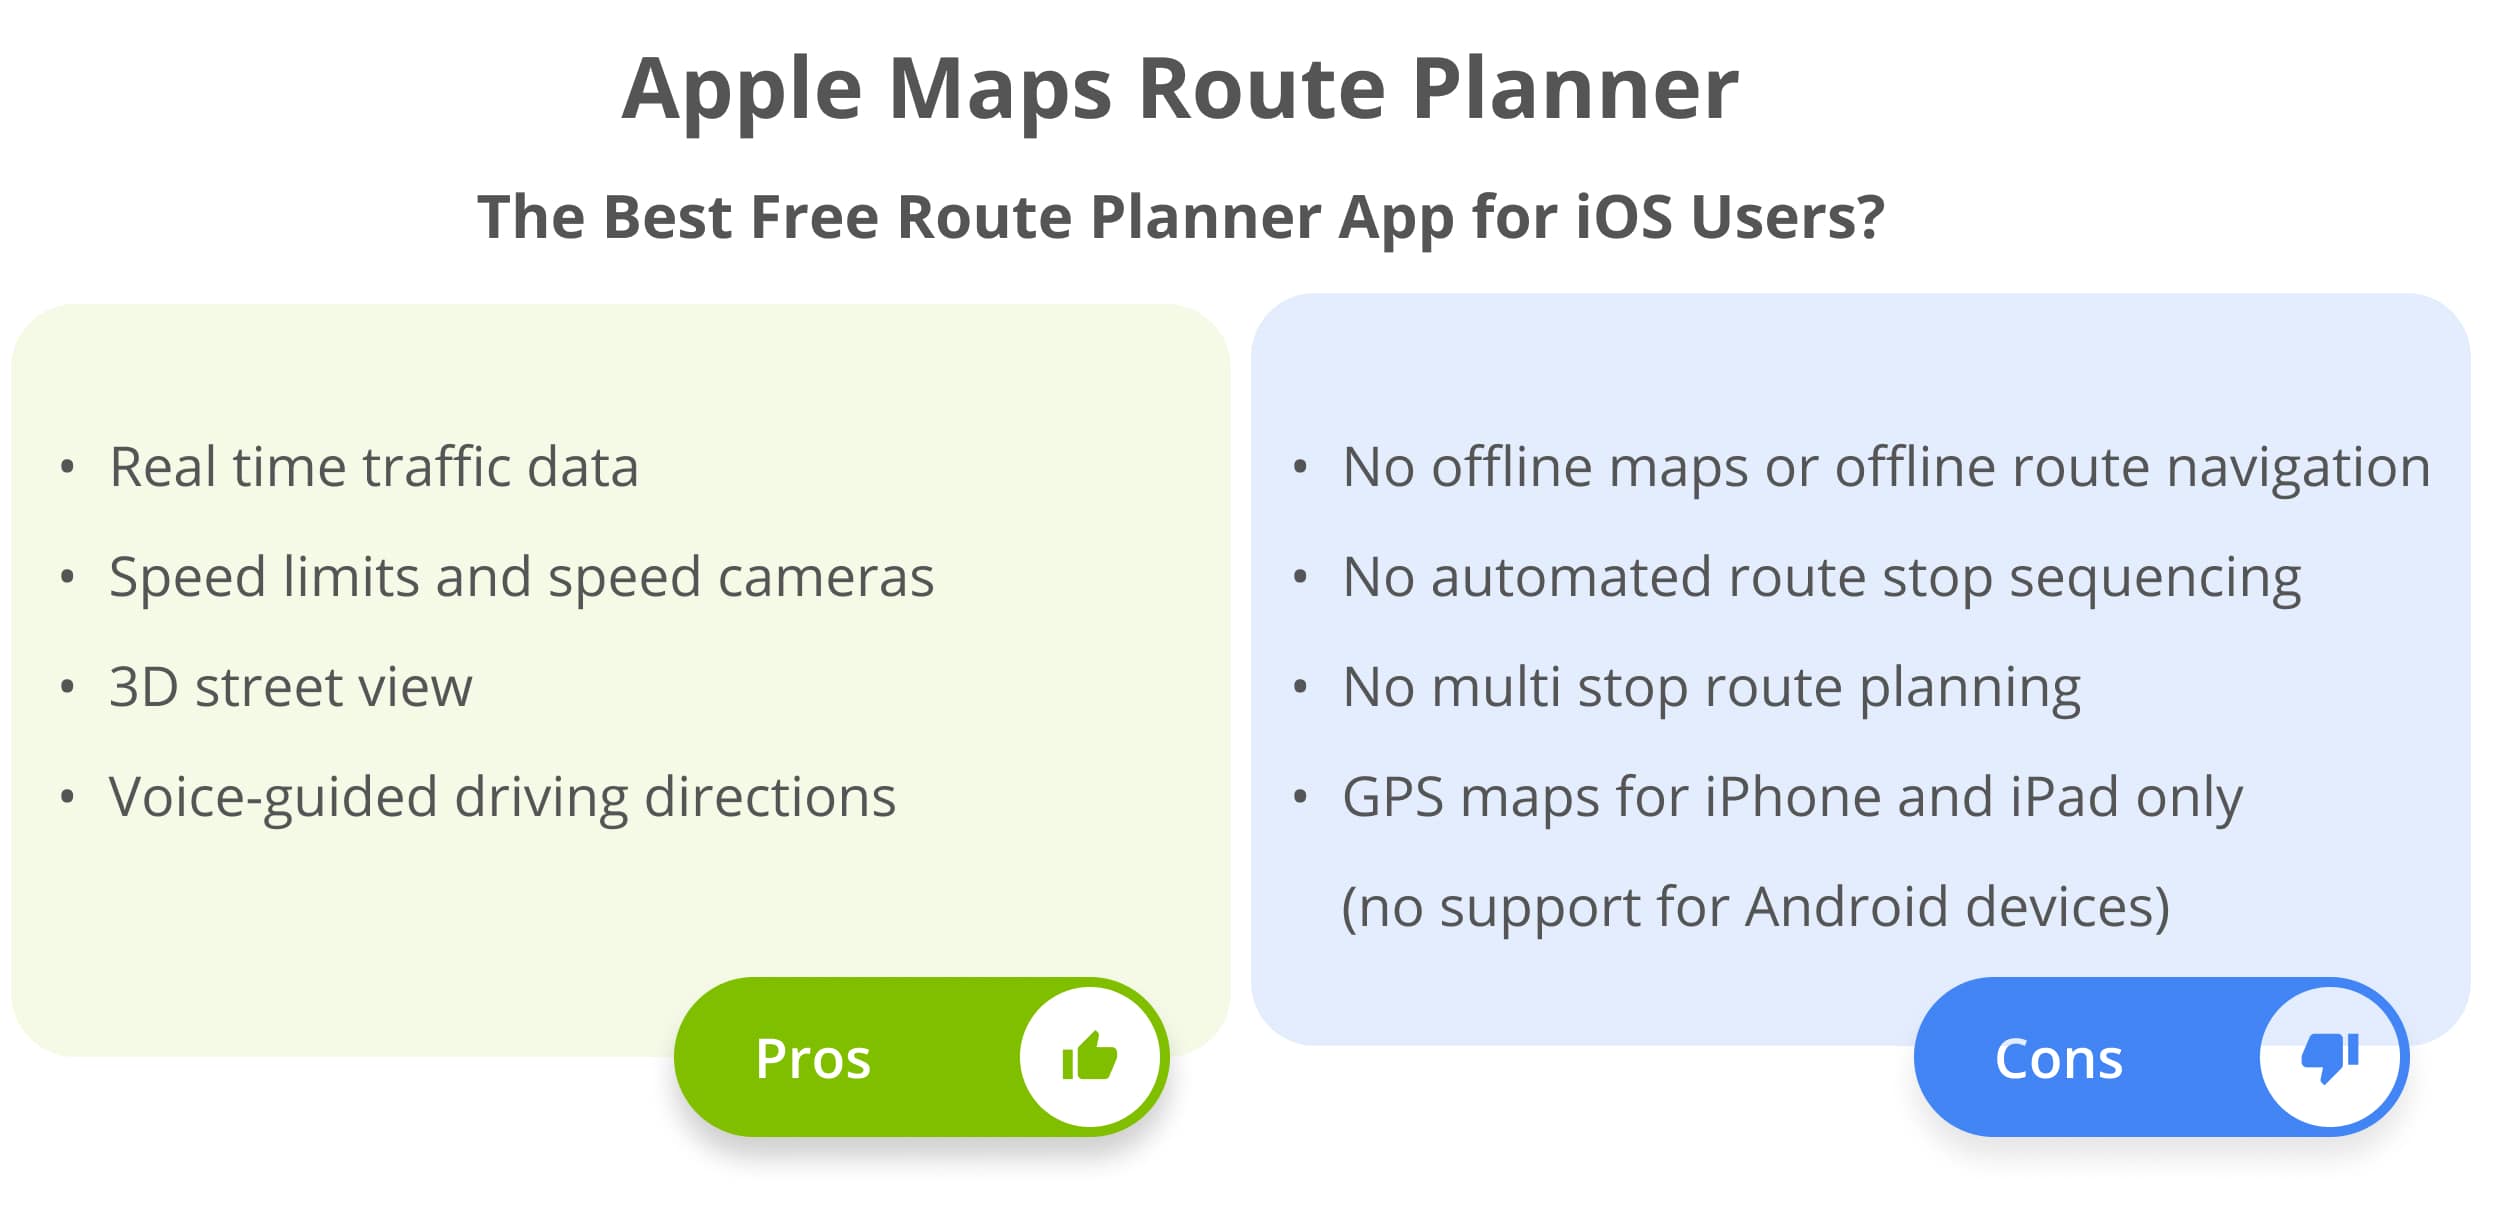 The pros and cons of planning delivery routes with the Apple Maps route planner - the best free route planner app for iPhone.